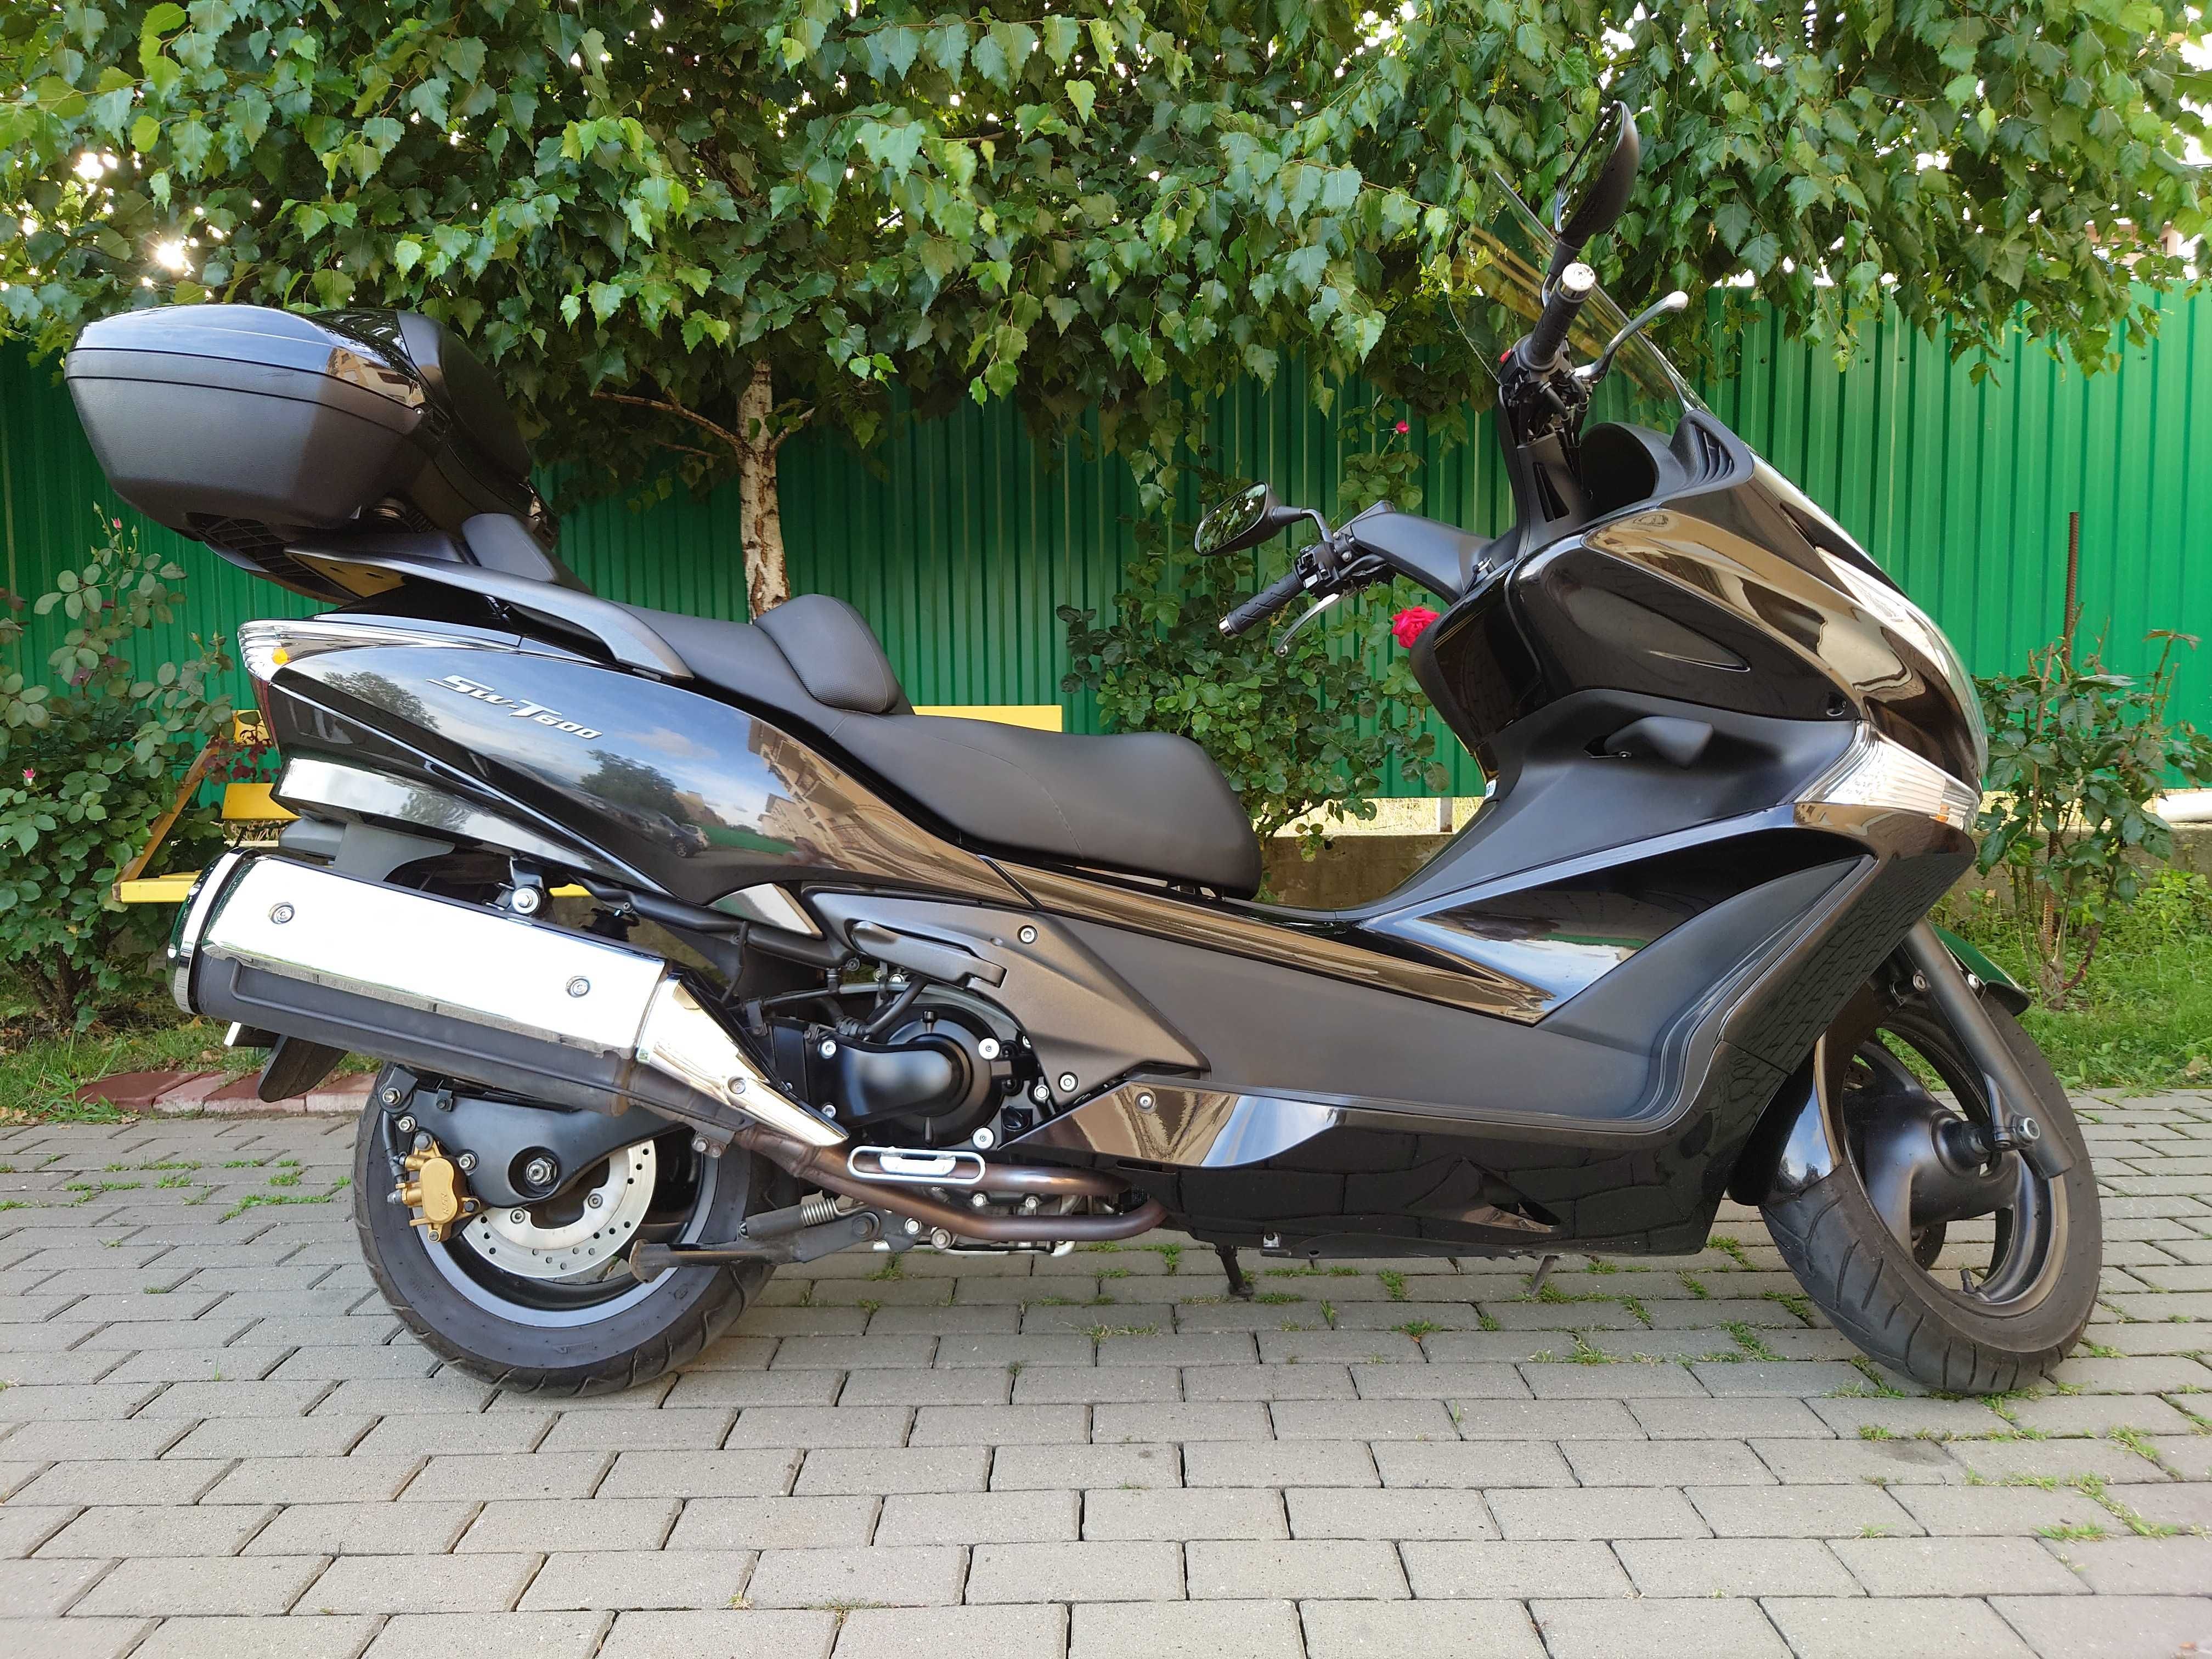 Honda silver wing (SWT-600)